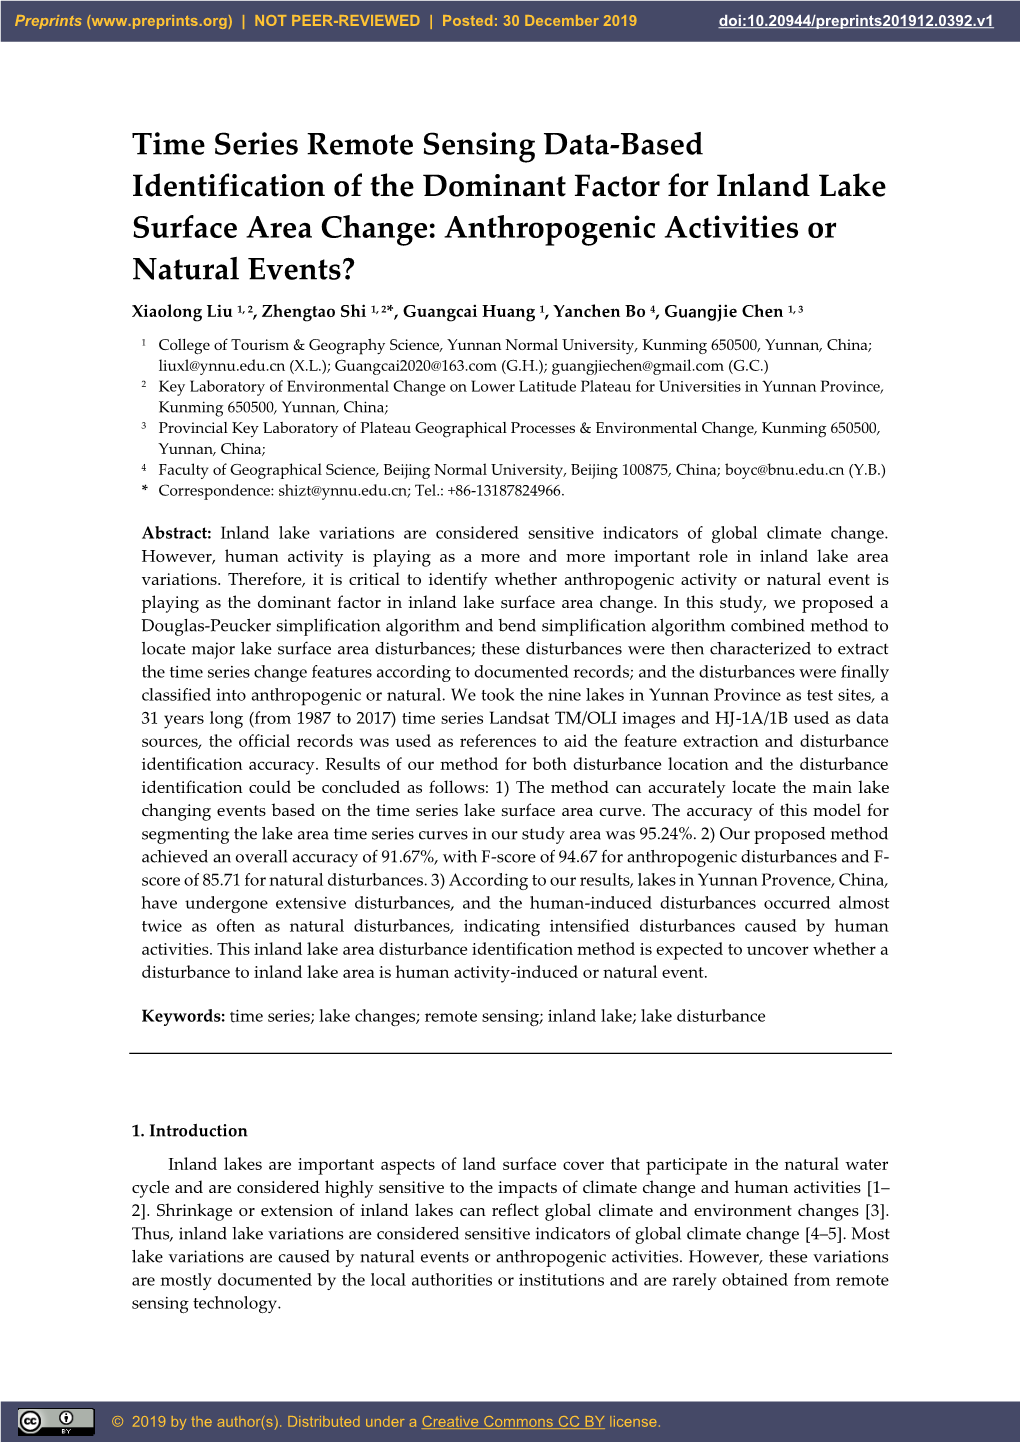 Time Series Remote Sensing Data-Based Identification of the Dominant Factor for Inland Lake Surface Area Change: Anthropogenic Activities Or Natural Events?